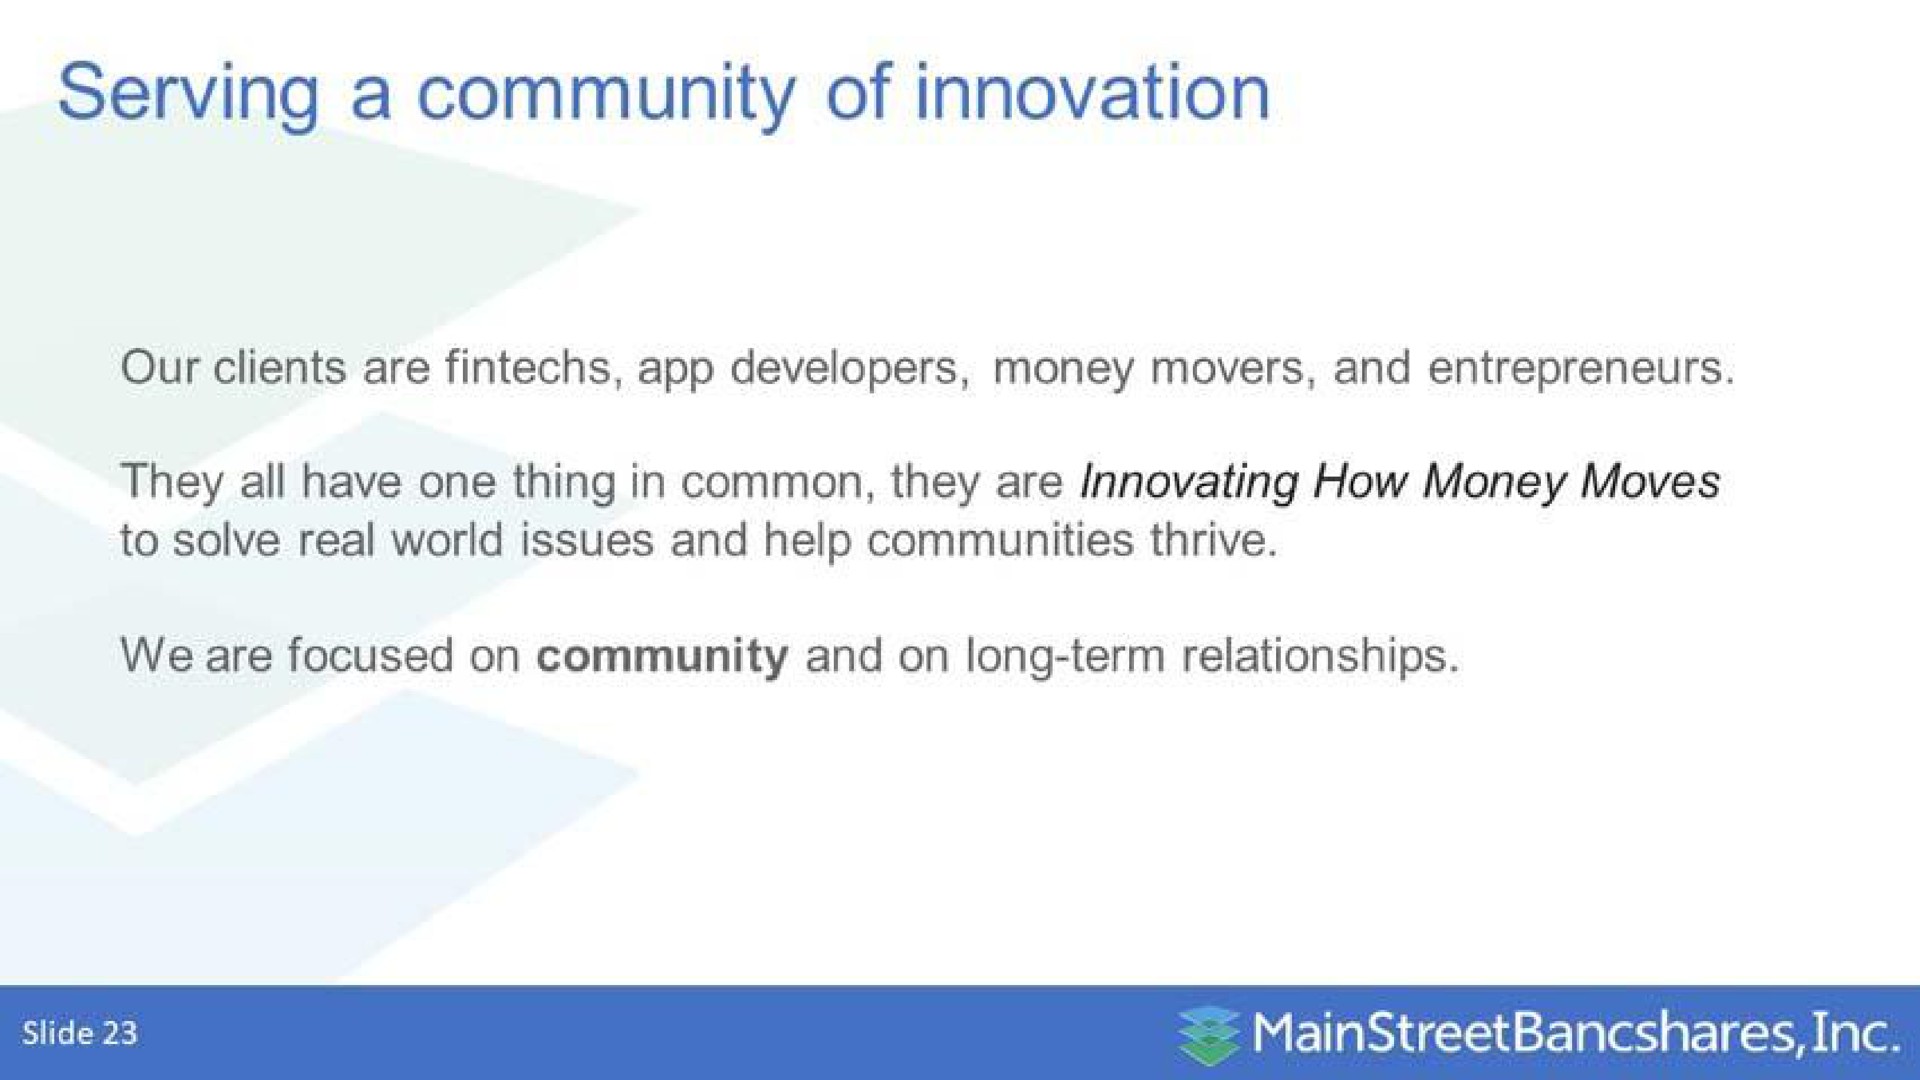 serving a community of innovation | MainStreet Bancshares